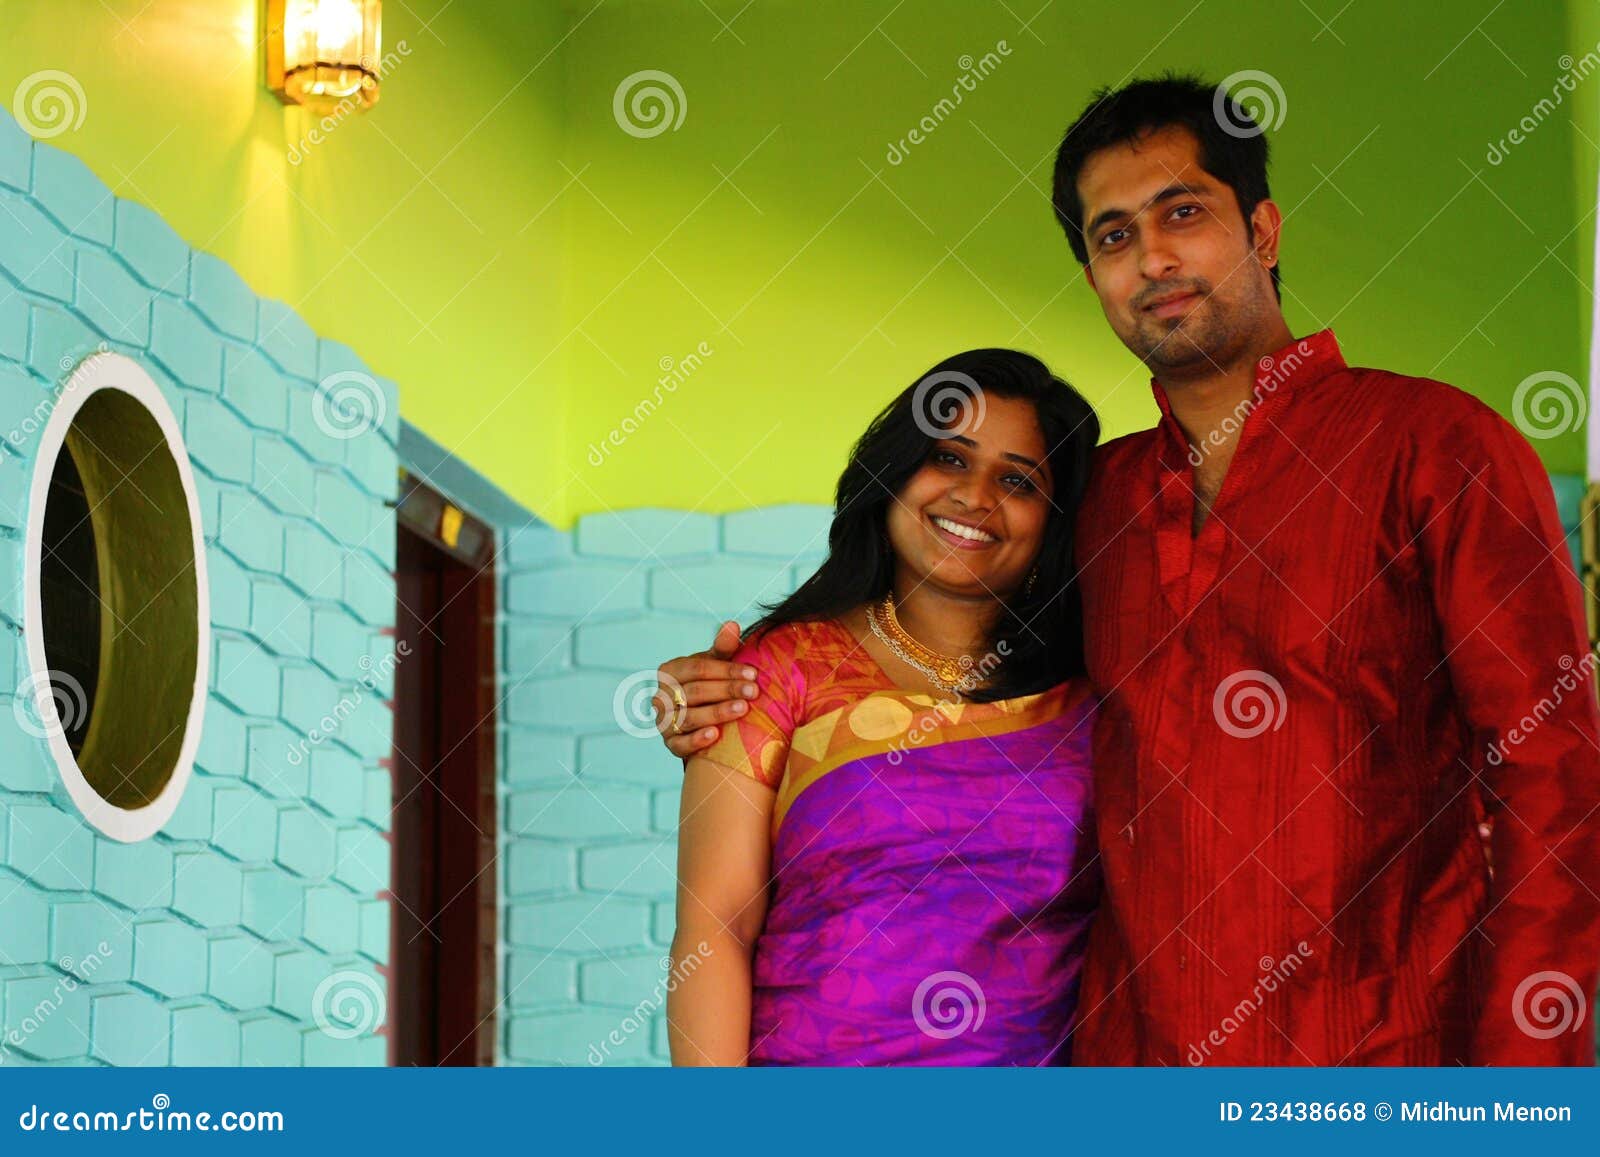 Pregnancy Photoshoot in Saree with Husband - Poses, Ideas and Tips